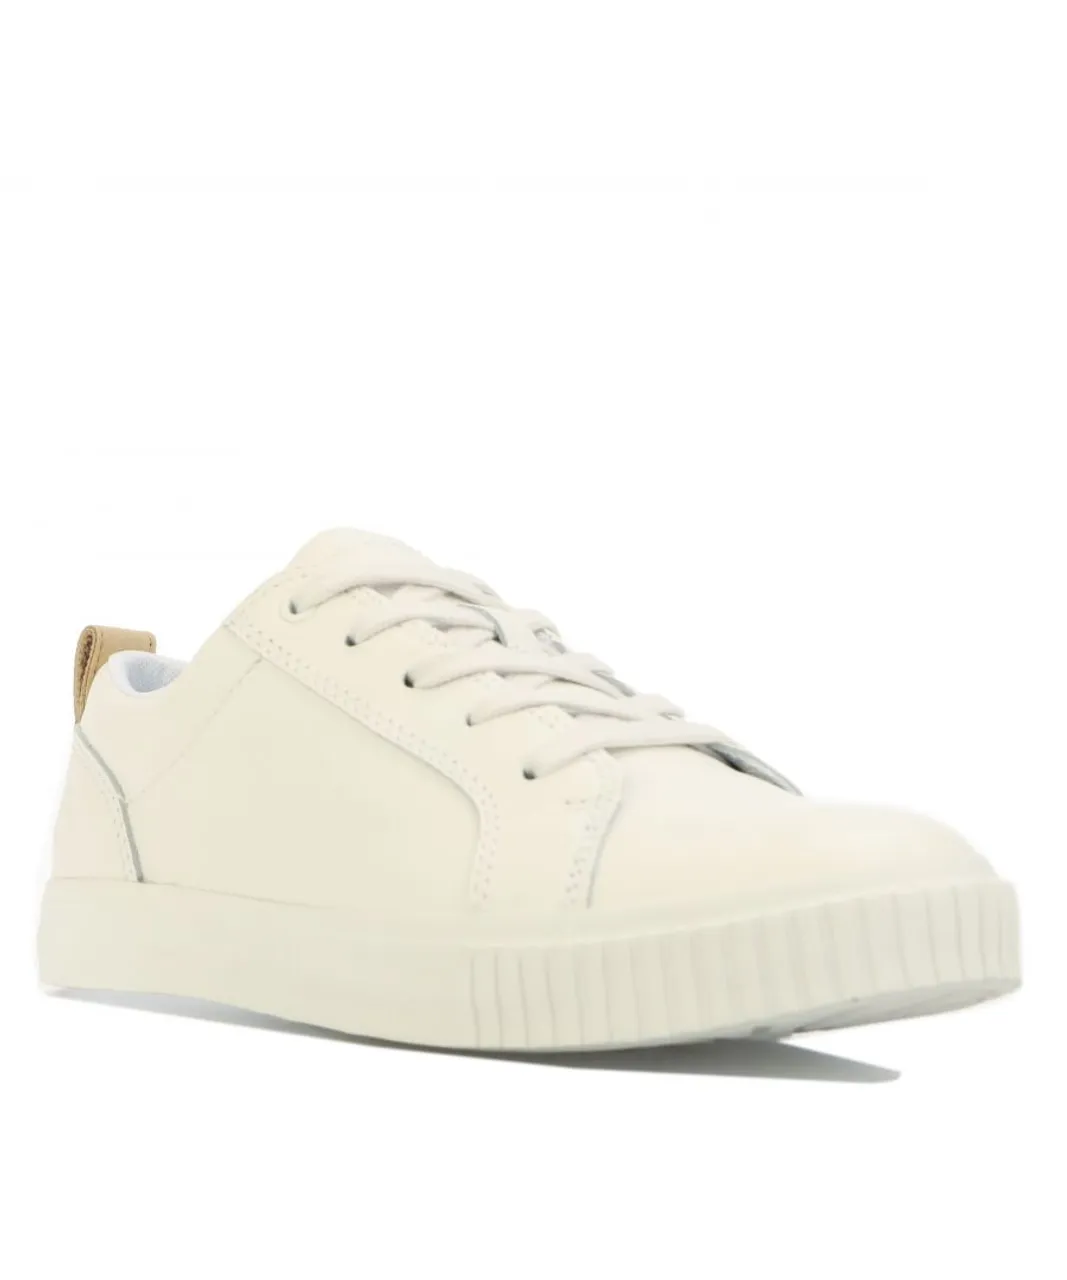 Timberland Womenss Newport Bay Leather Oxford Trainers in White Leather (archived)